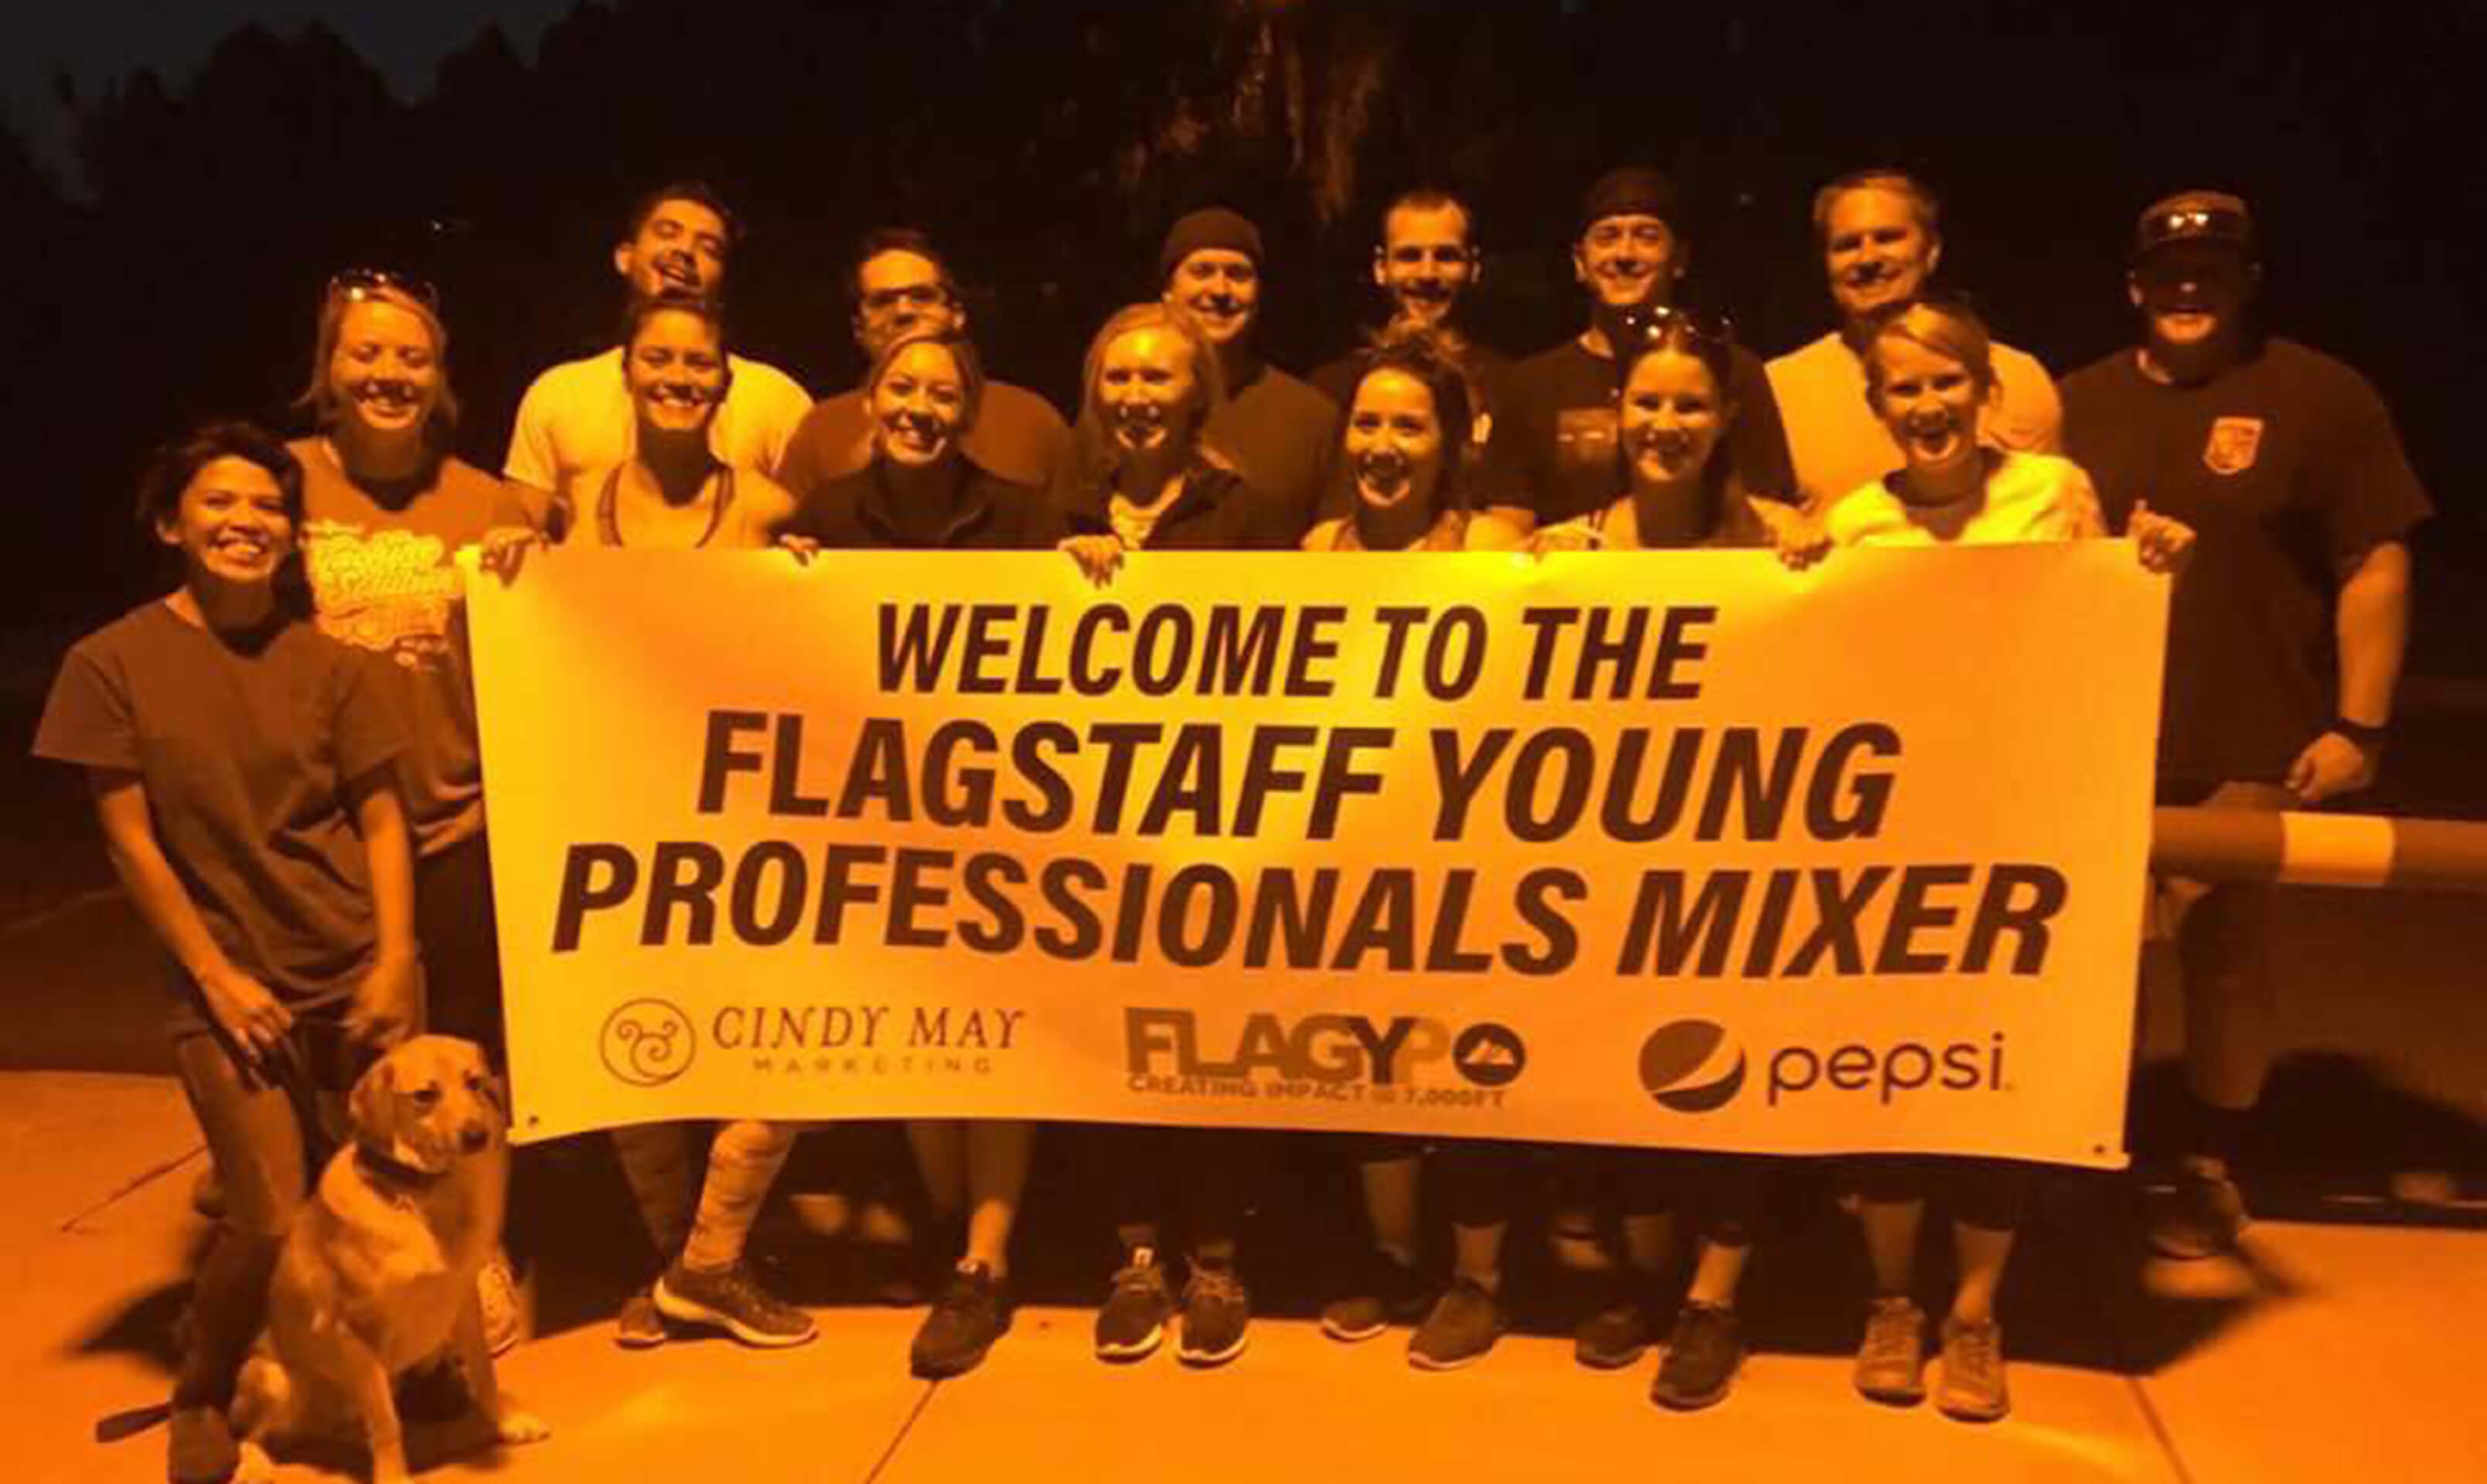 FYP mixer group photo with sign